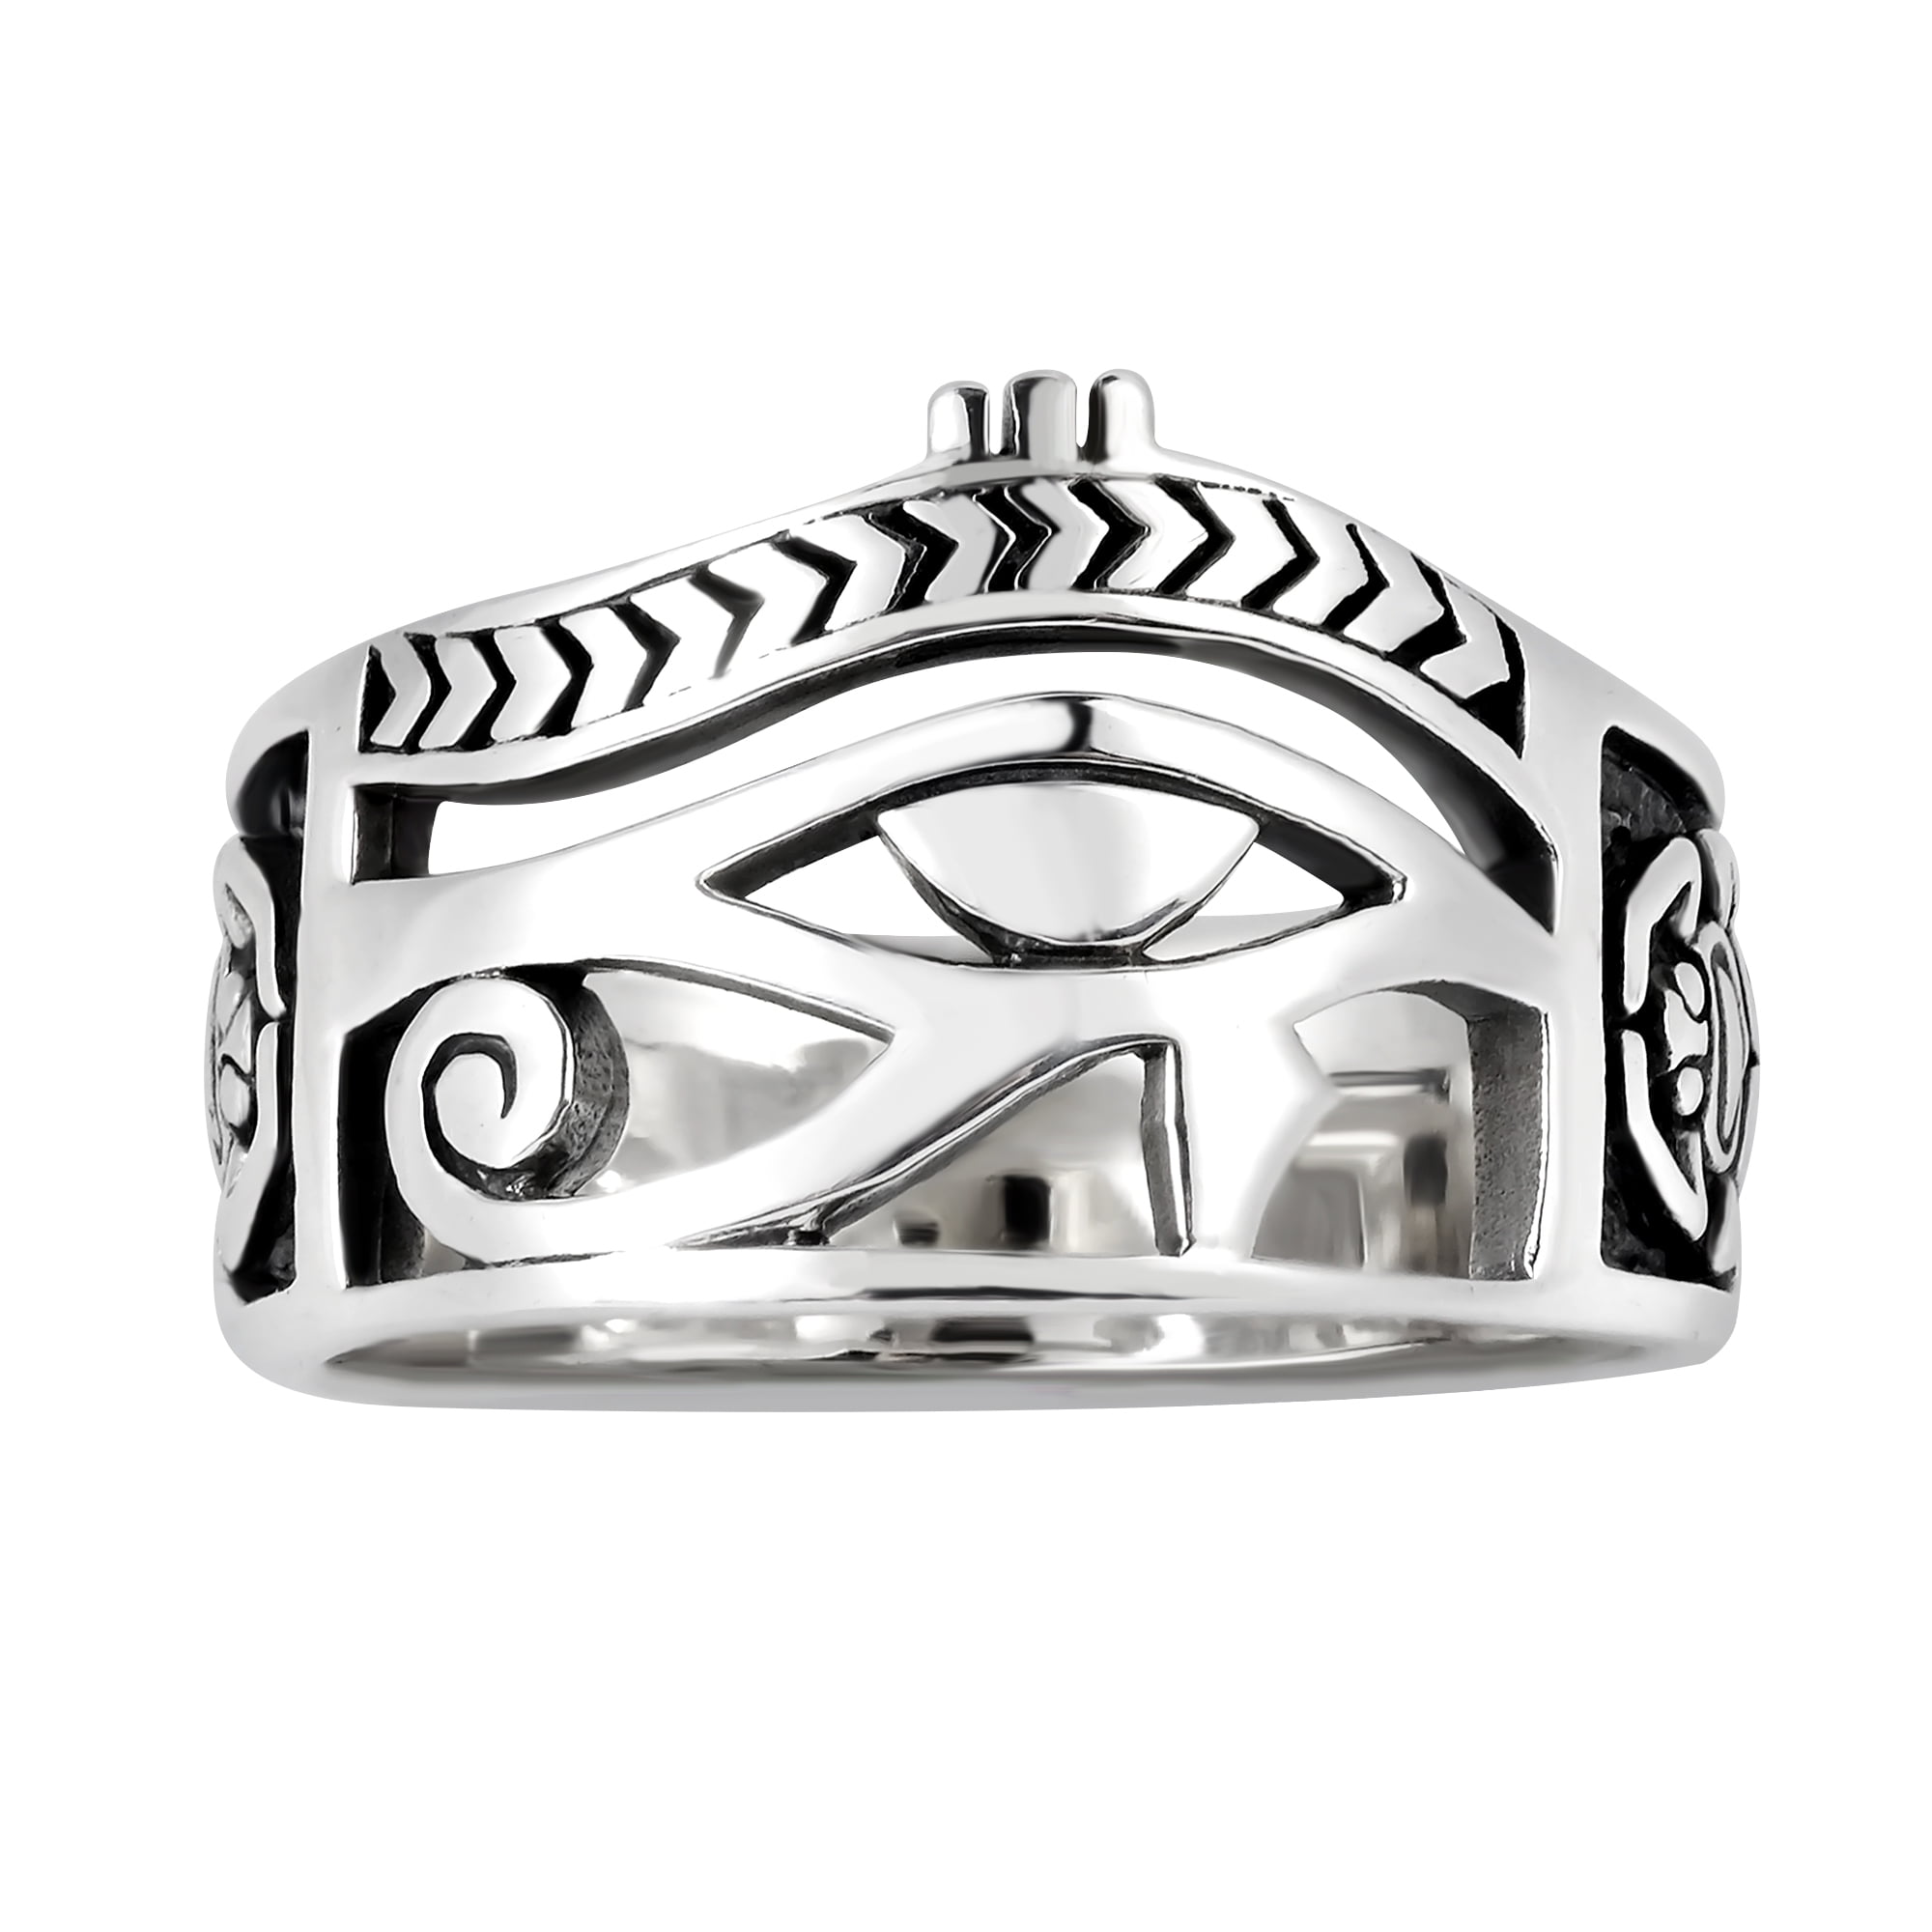 Eye of Horus with Egyptian Ankh Crosses Sterling Silver Unisex Ring